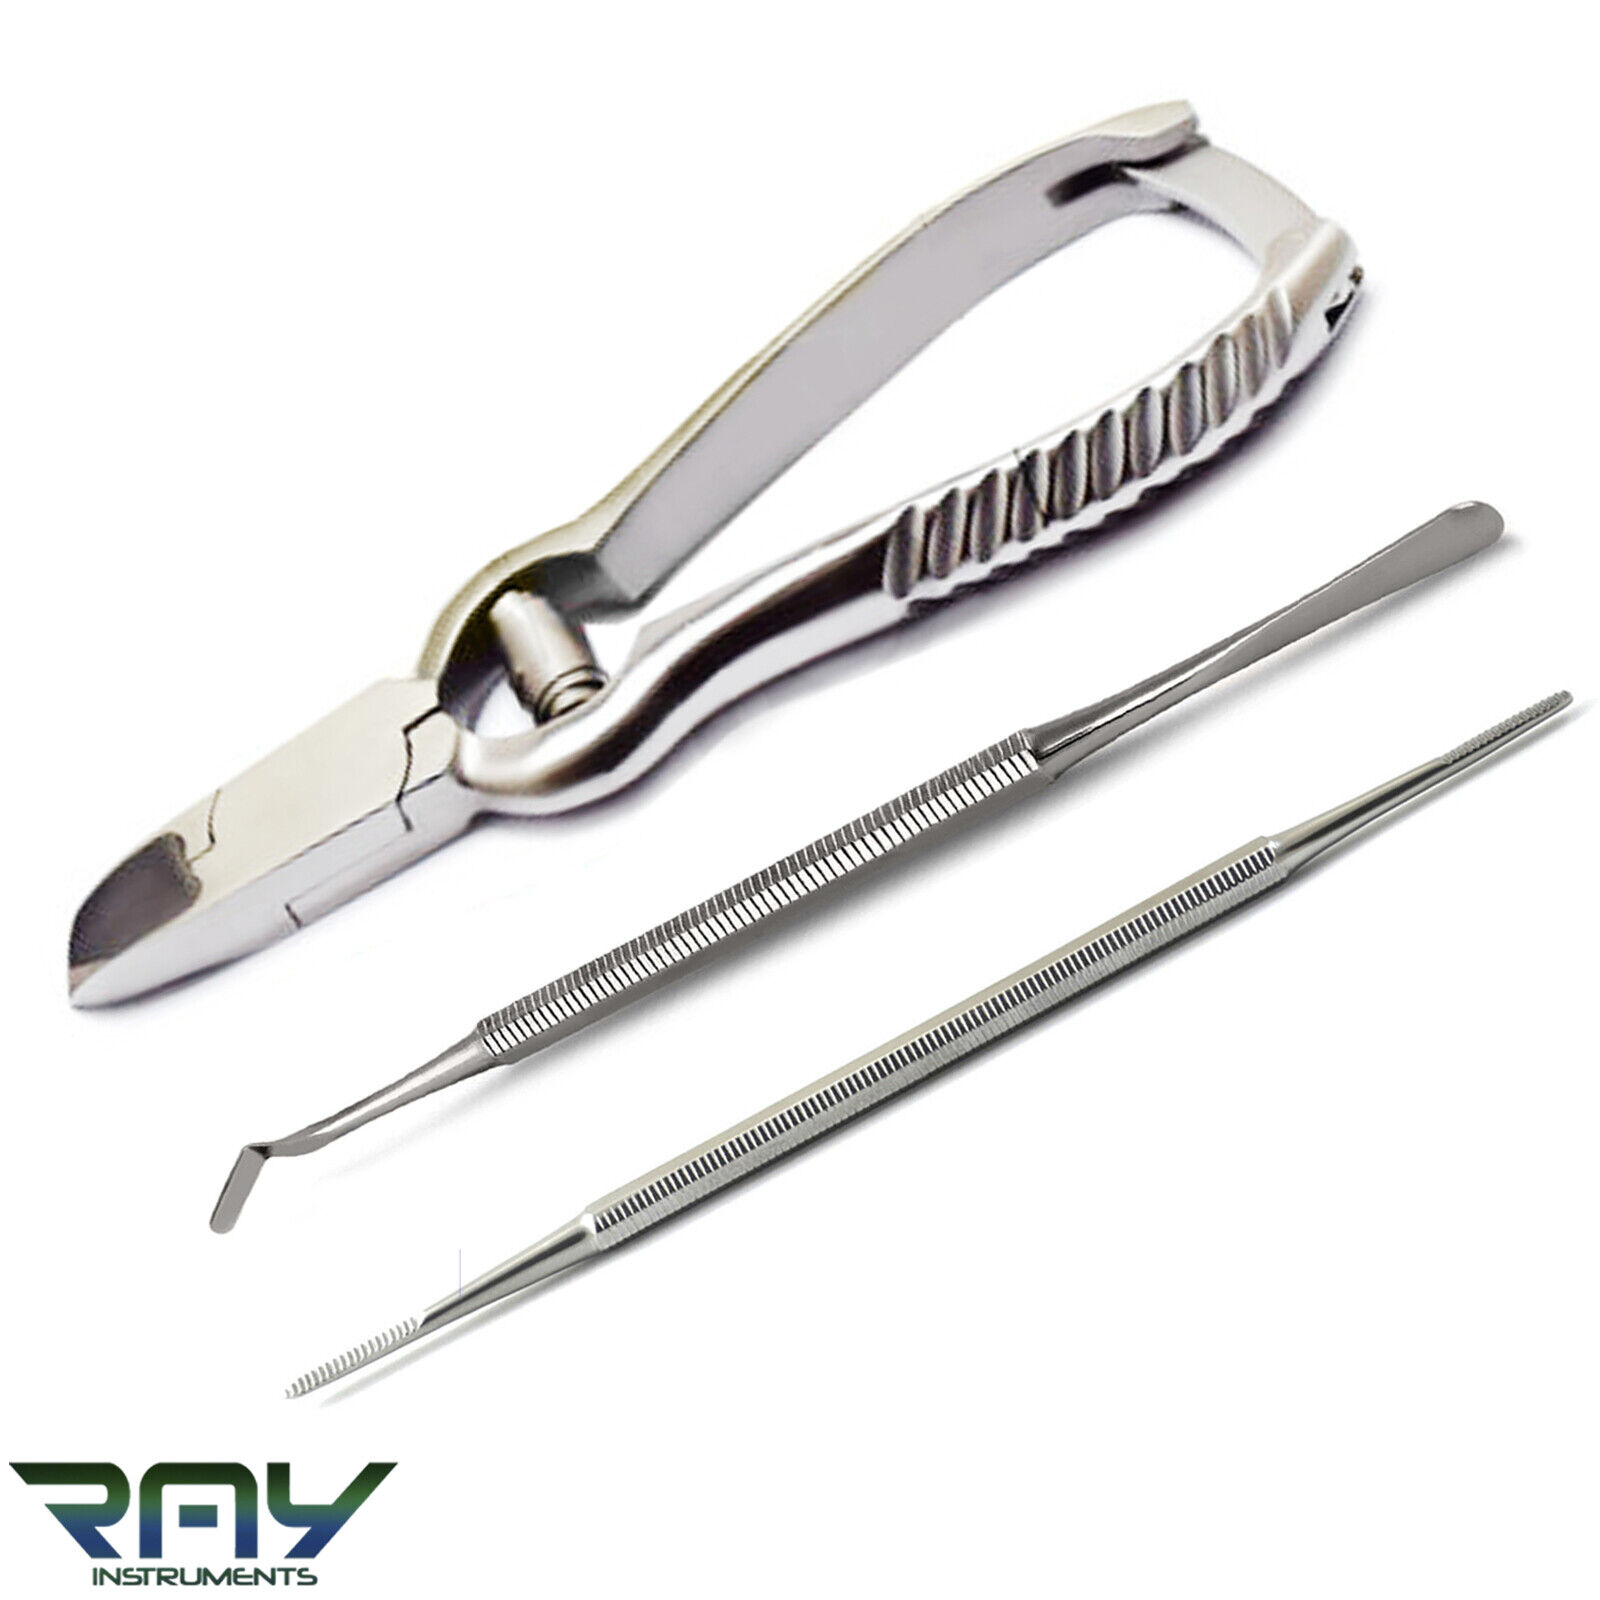 Super beauty product restock quality top Toe Nail Clipper Cutter - Chiropody Heavy Duty Thick F Nails Popular products for